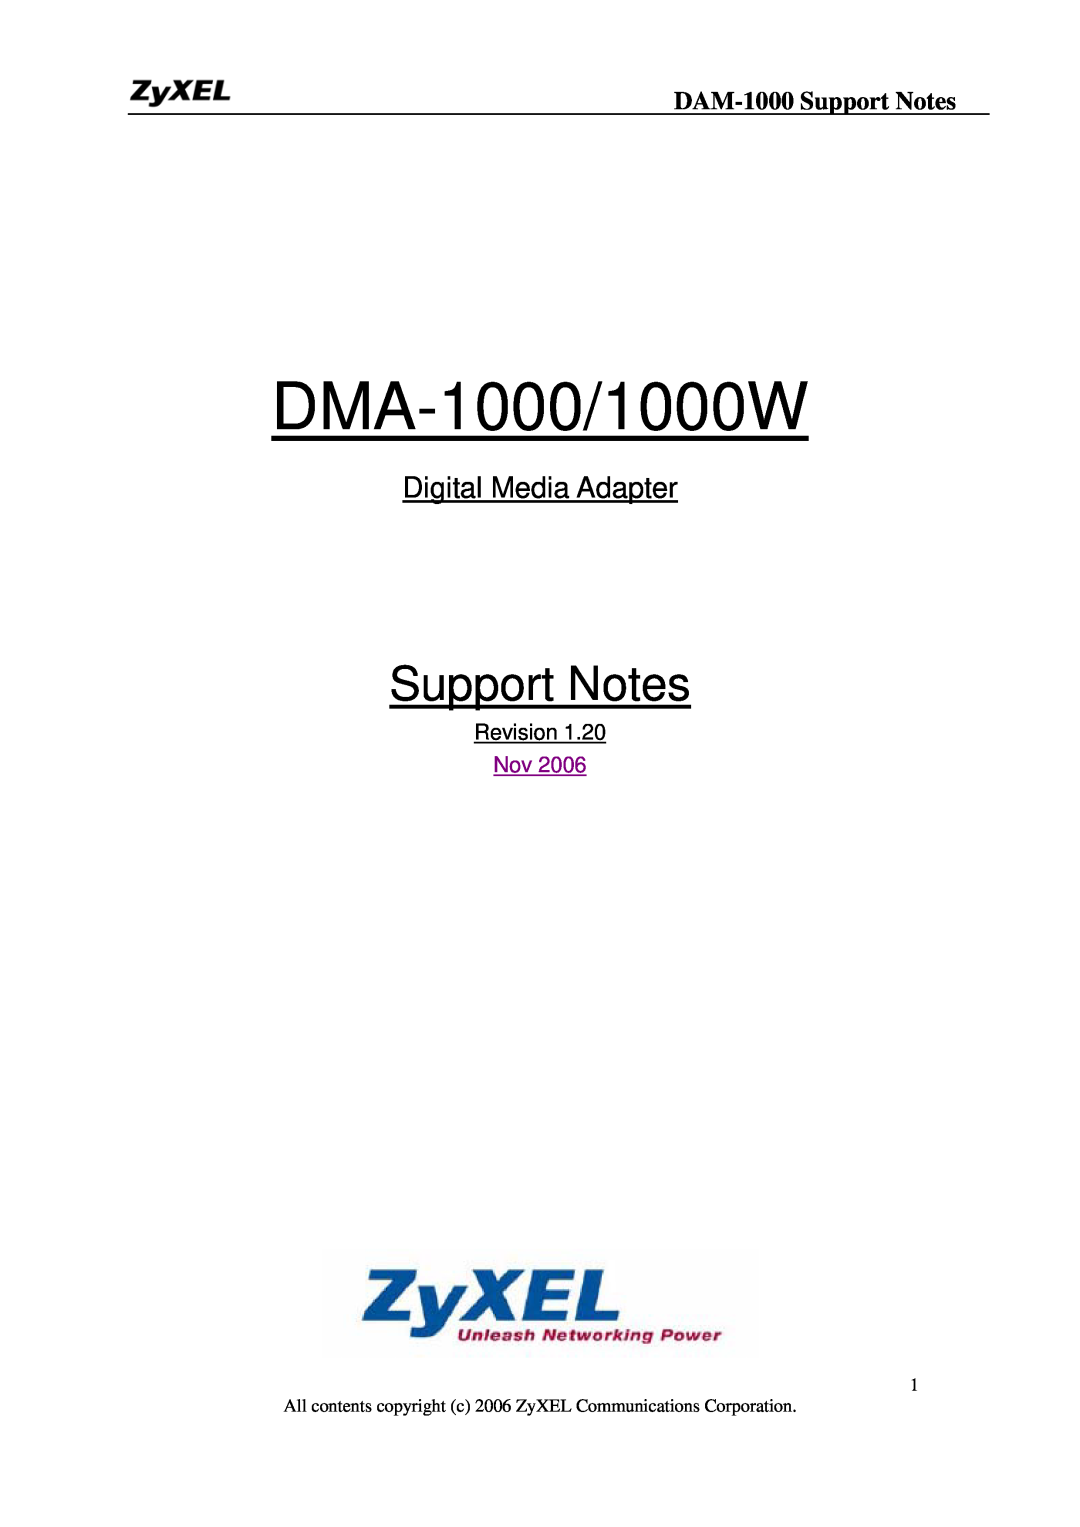 ZyXEL Communications DMA-1000W manual DAM-1000 Support Notes, DMA-1000/1000W, Digital Media Adapter, Revision 